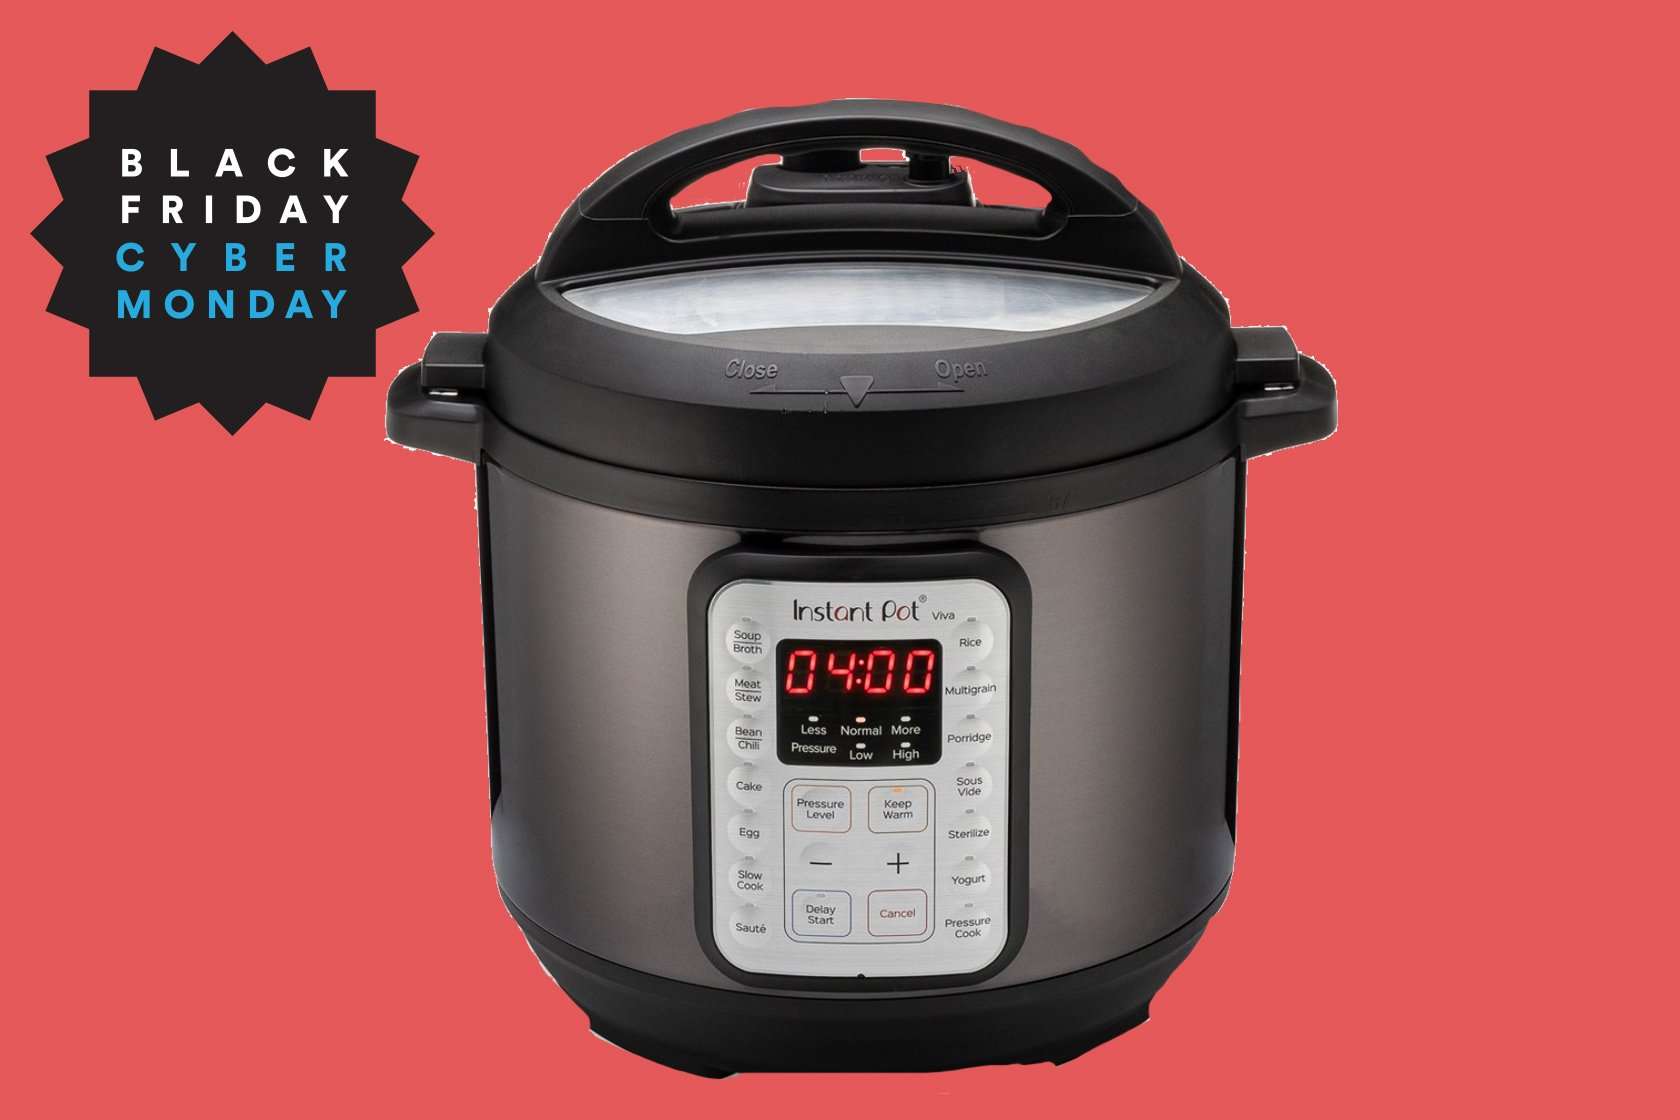 Get the Instant Pot VIVA for only $49 at Walmart